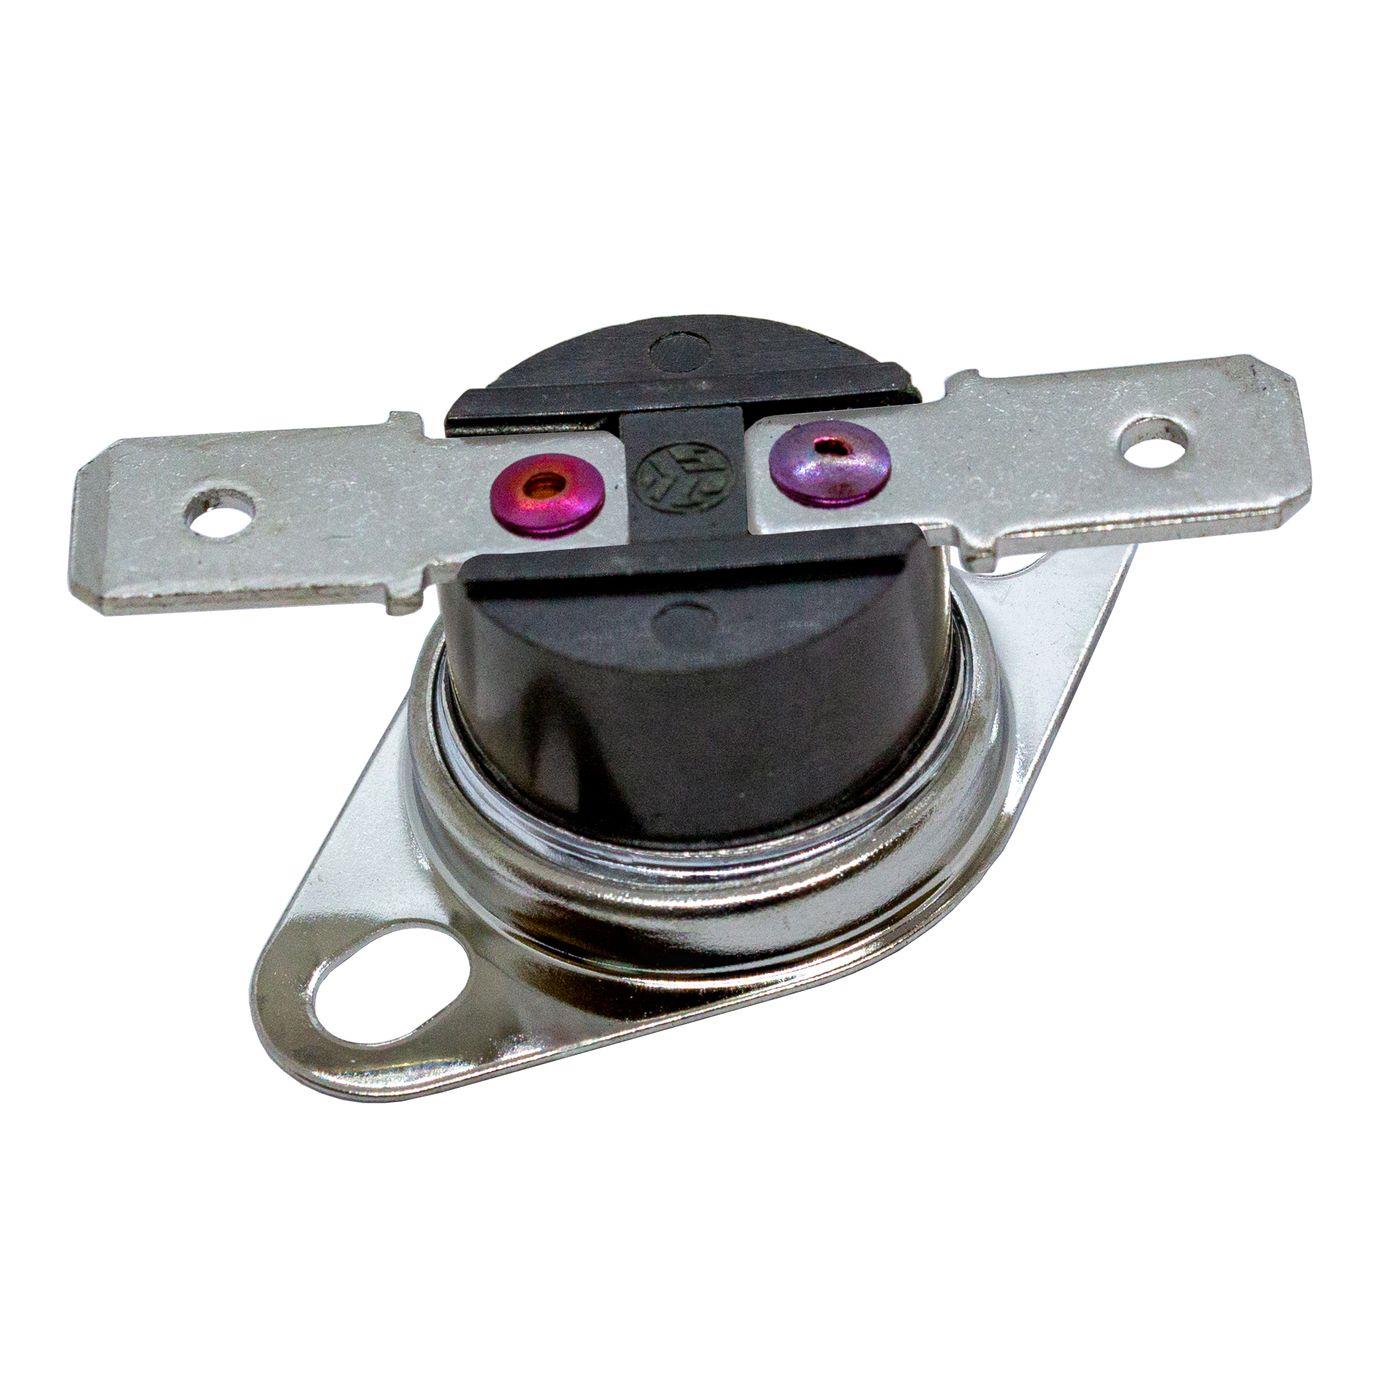 Thermal switch 45°C NC contact 250V 10A Temperature switch thermostat KSD301 Bimetal Thermal protection